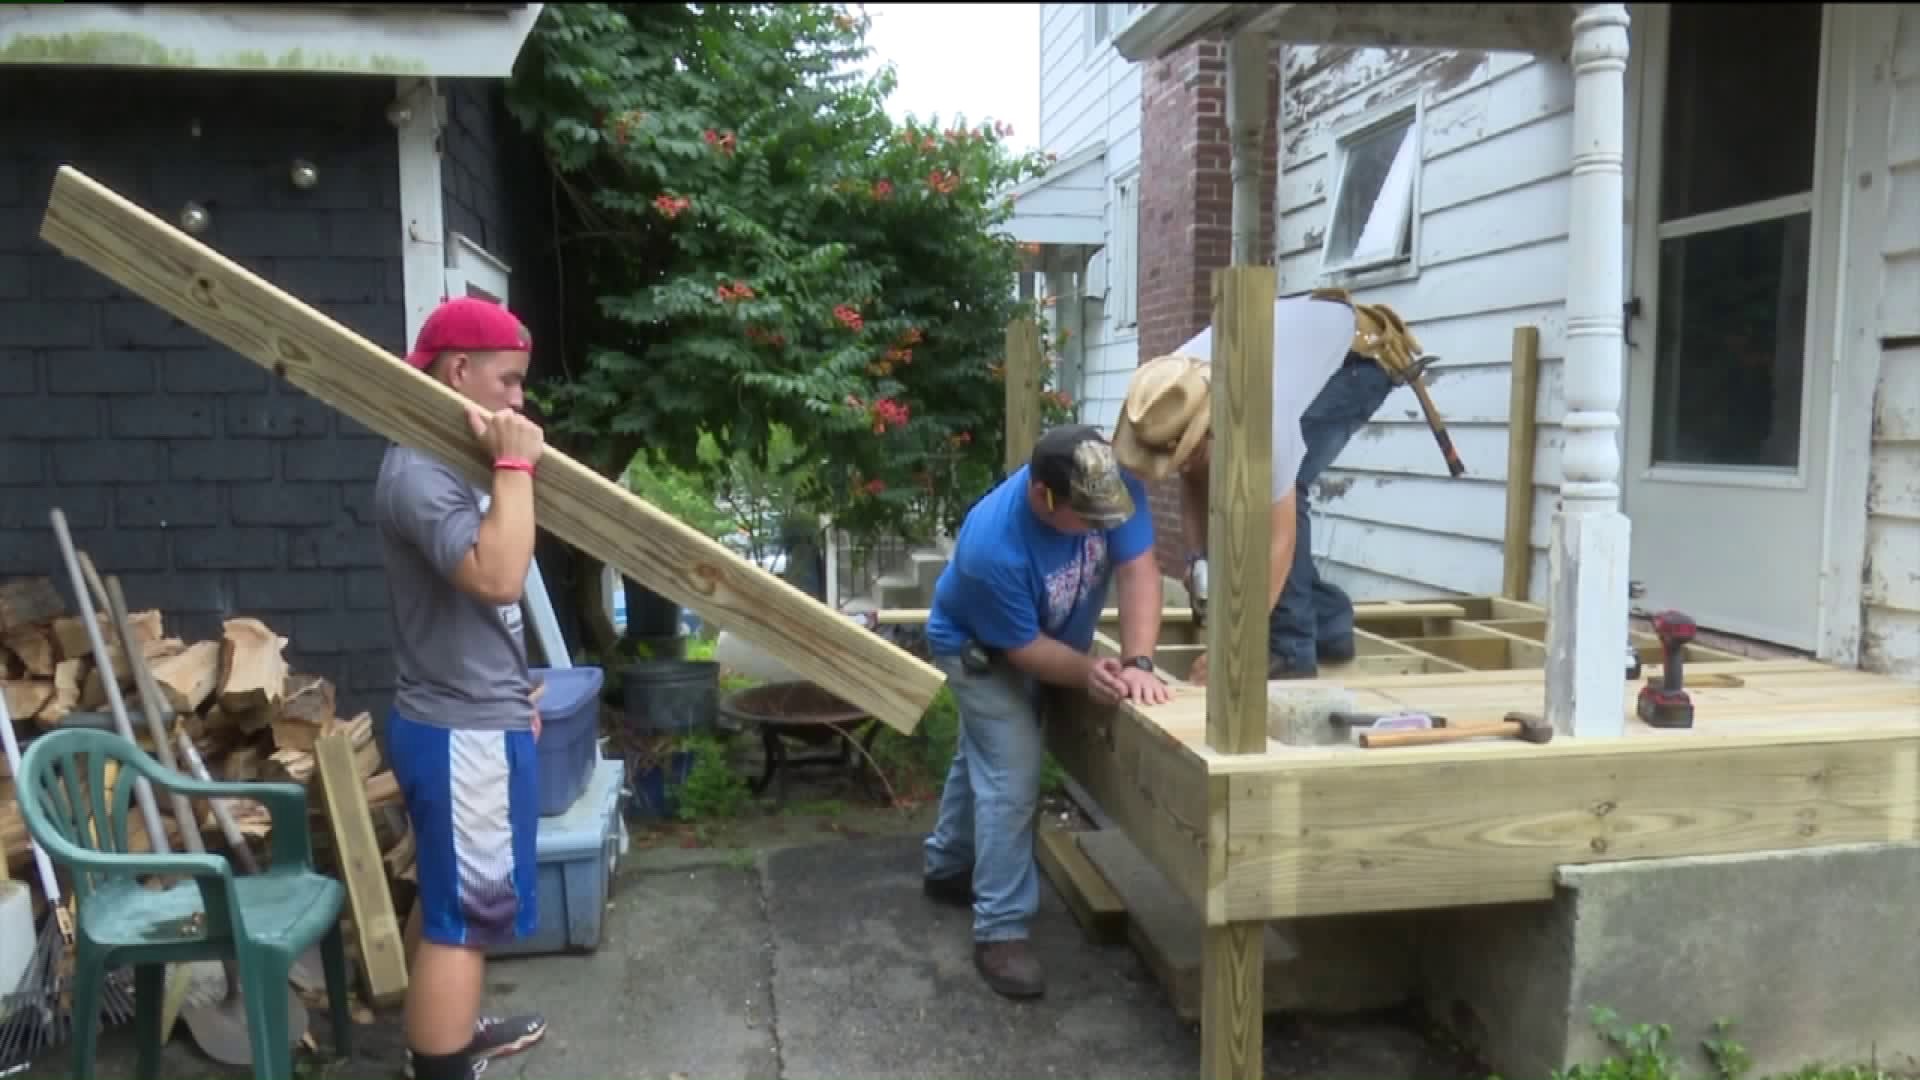 Teens Participate in Summer Camp Service Projects